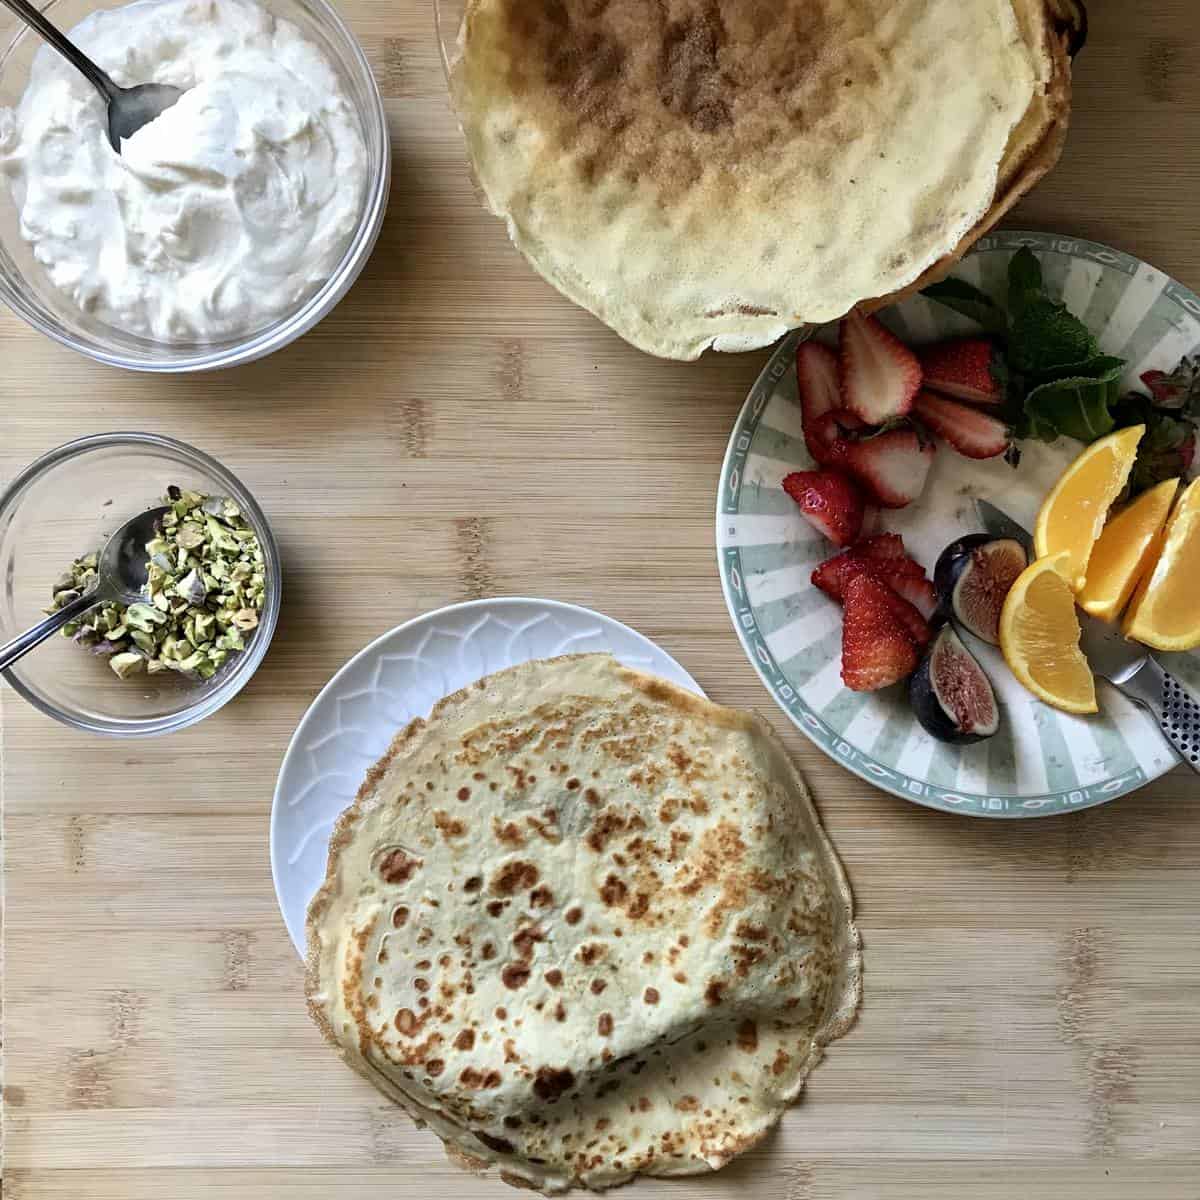 A simple crepe on a plate.